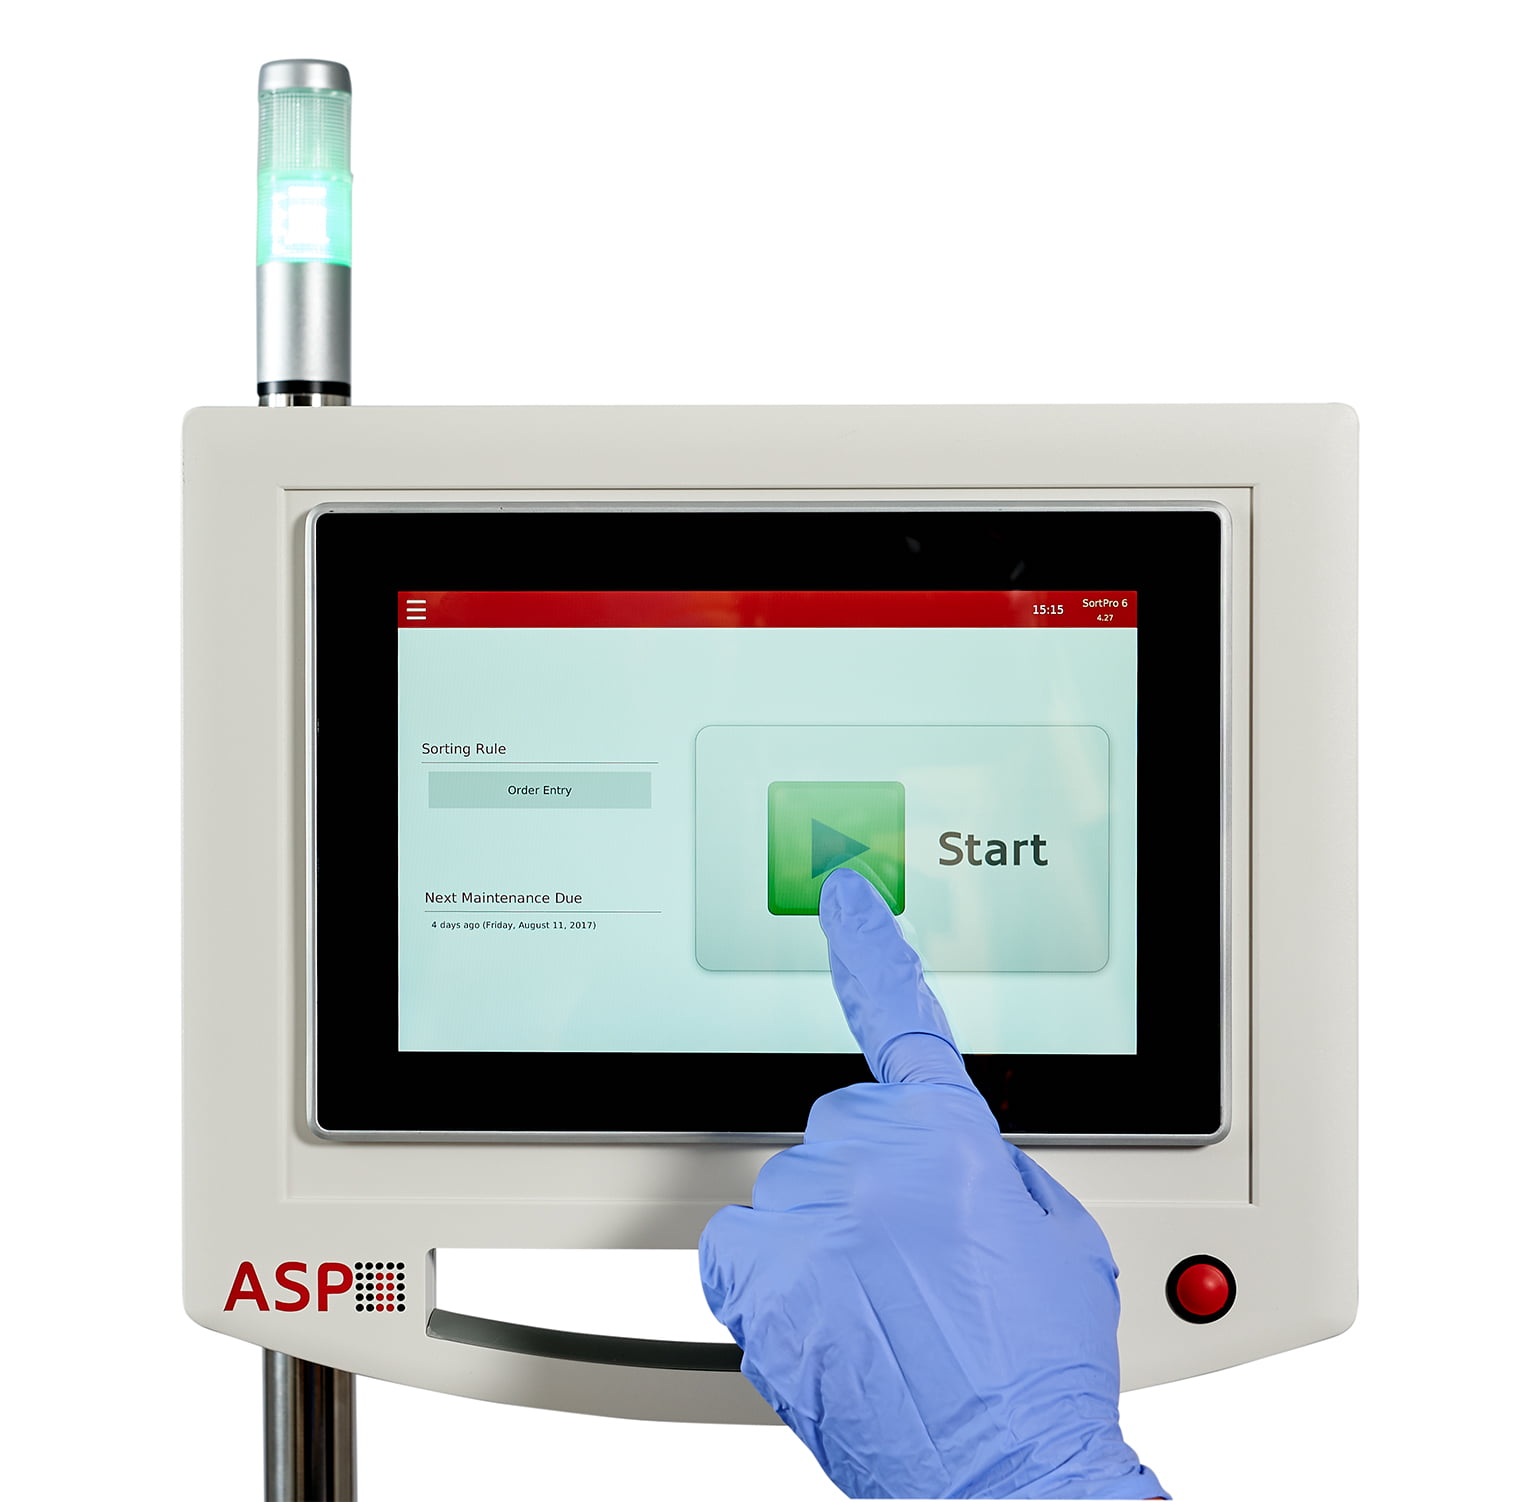 Picture shows a hand with blue medical gloves touching the start button on the digital screen of ASP SortPro Tube Sorter